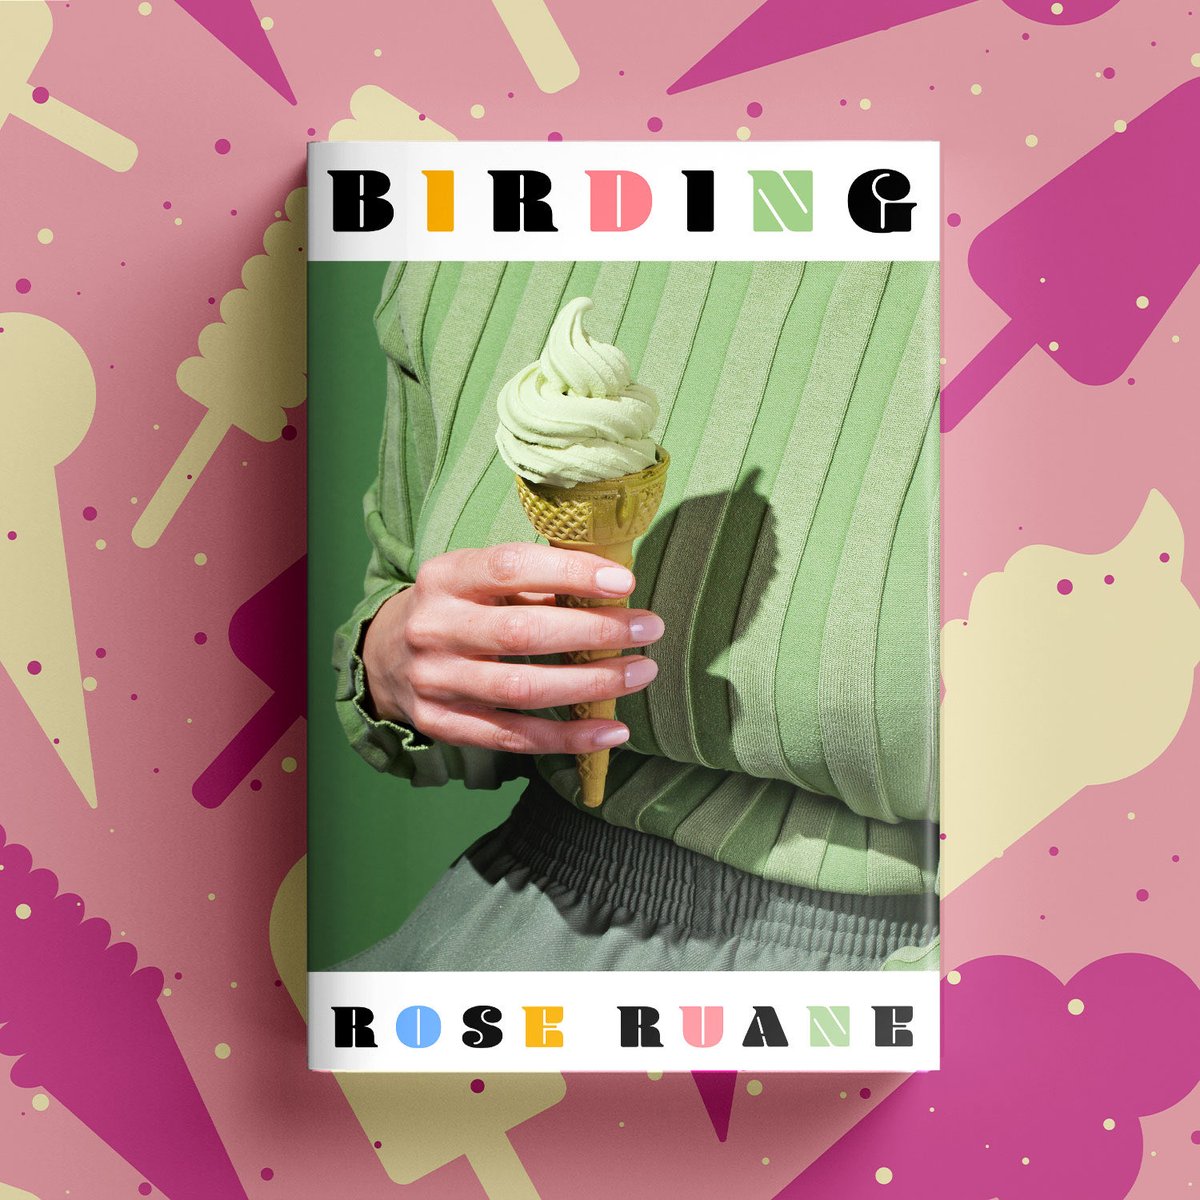 Birding is out tomorrow, please join me to launch it into the world at Waterstones Sauchiehall Street tomorrow evening💚🍦💕 waterstones.com/events/an-even…